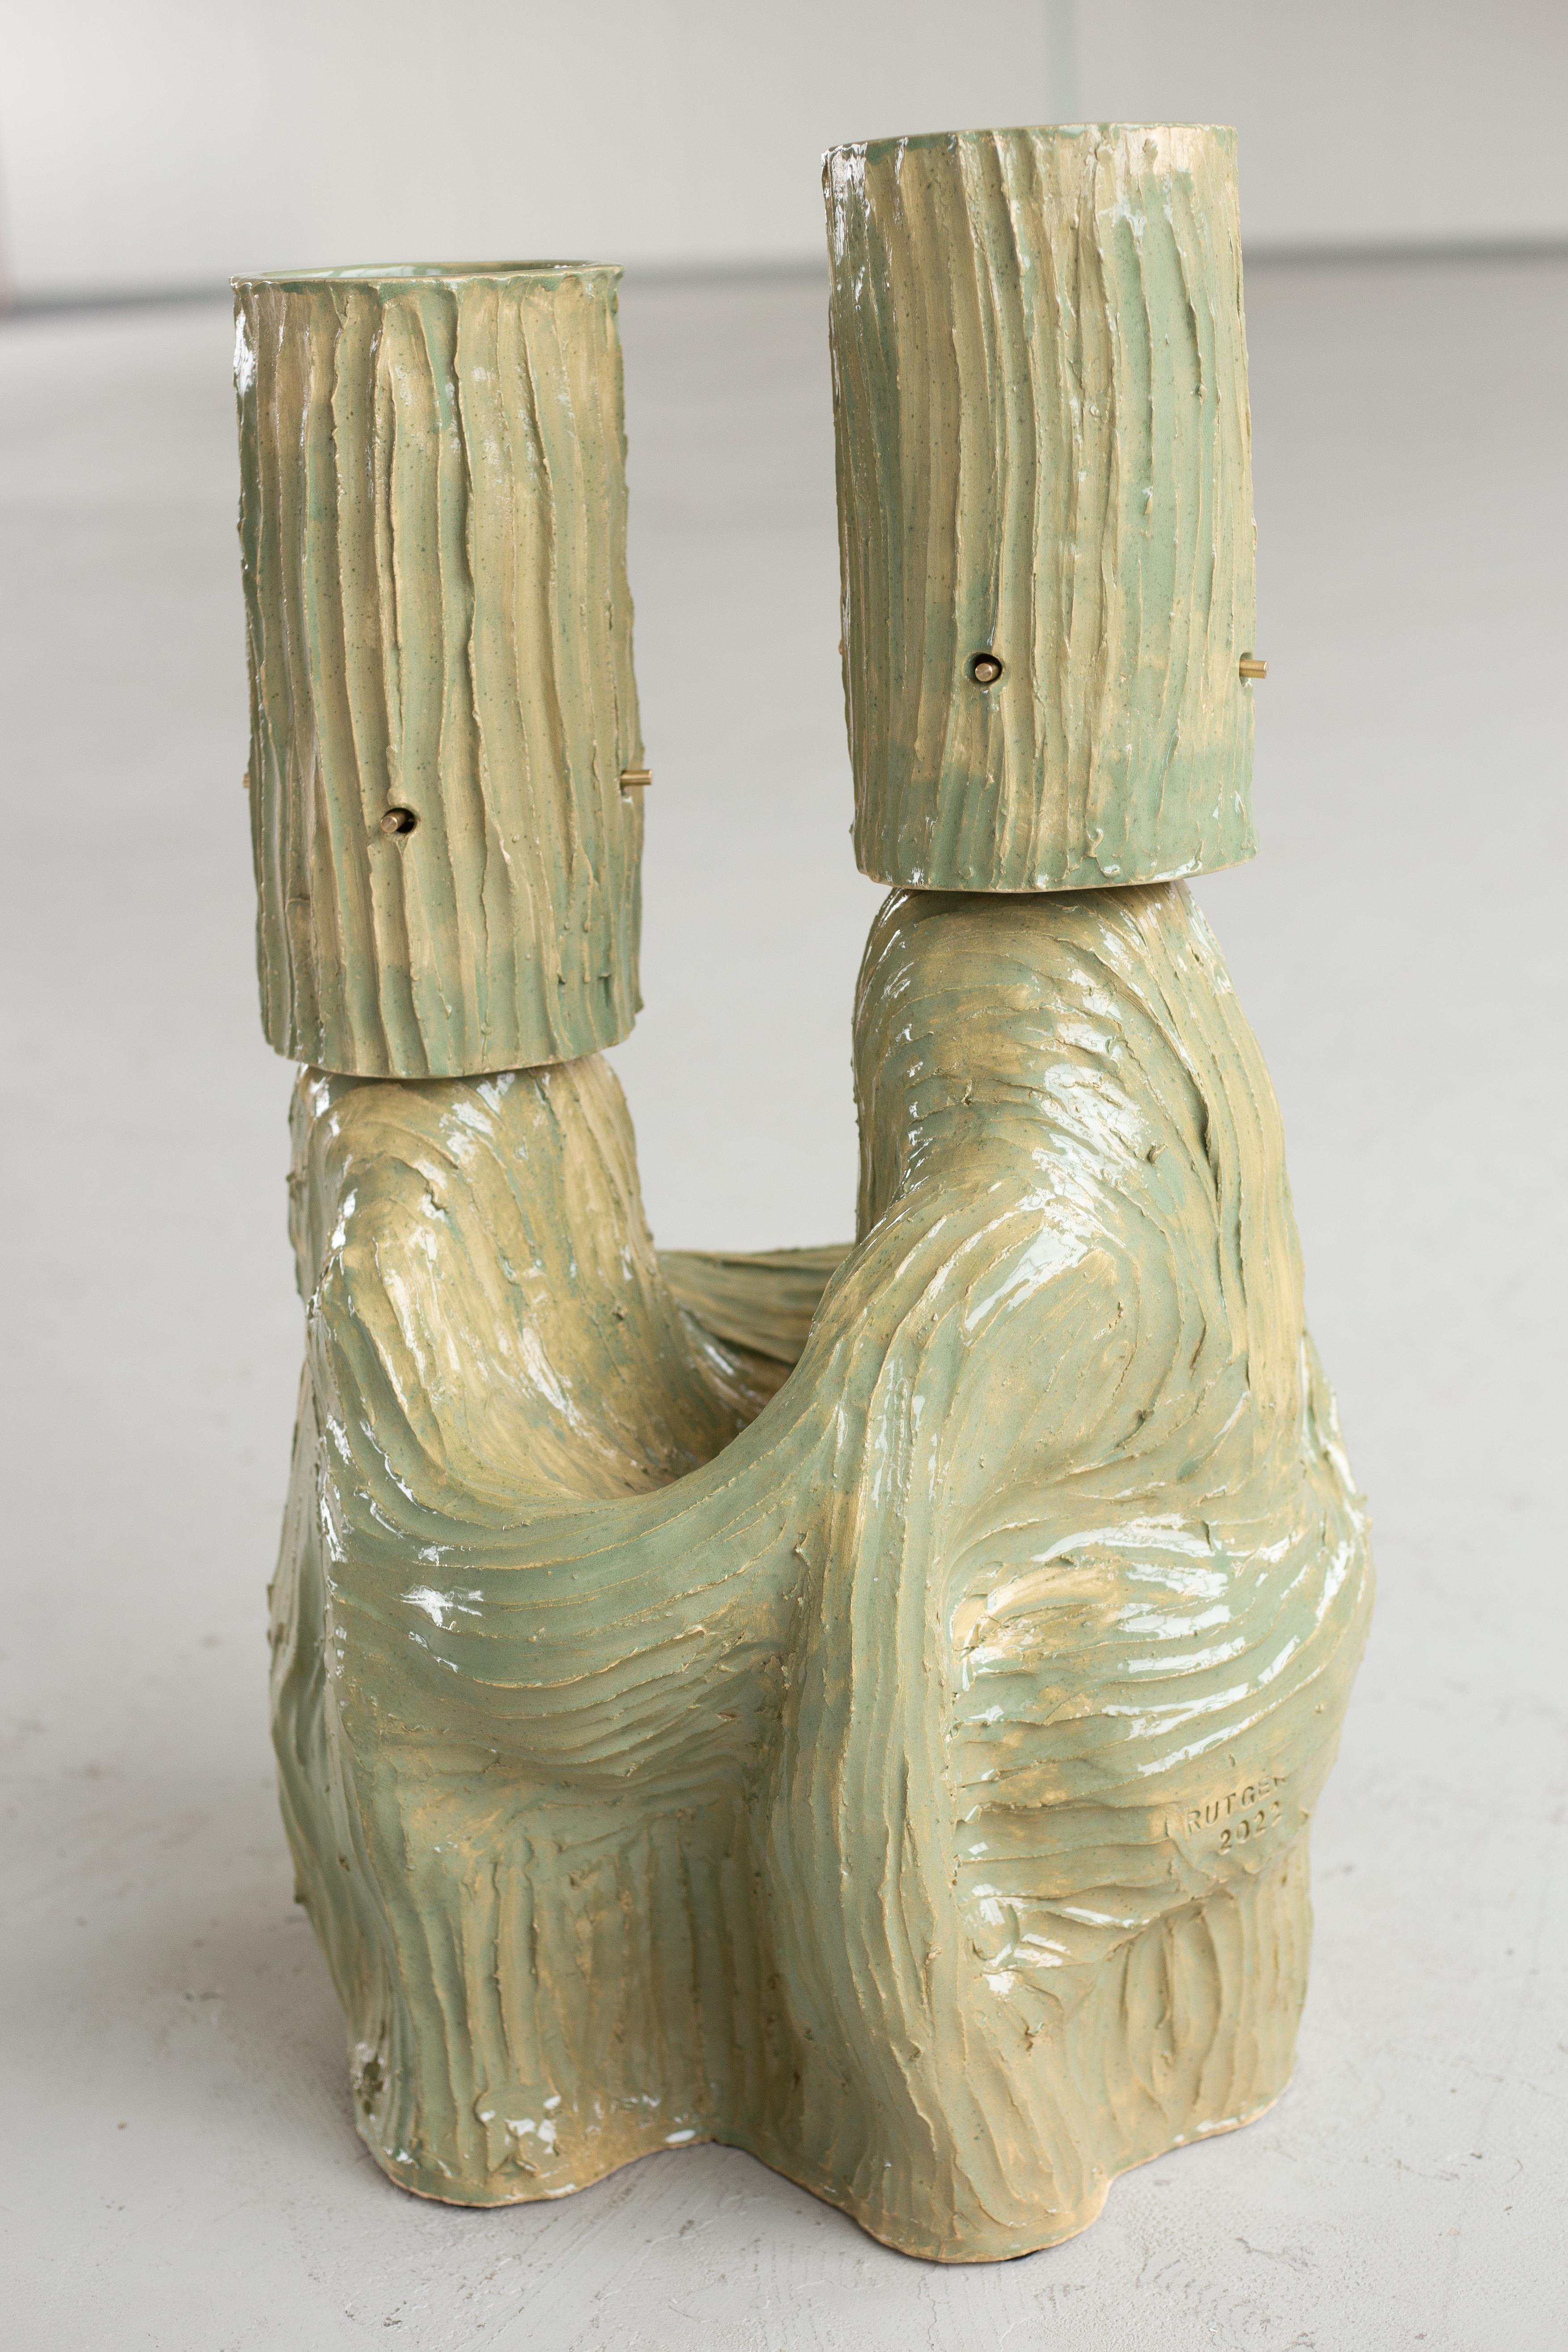 Sculptural earthenware table light resembling embracing characters

The piece is a one-off and signed by the artist.

